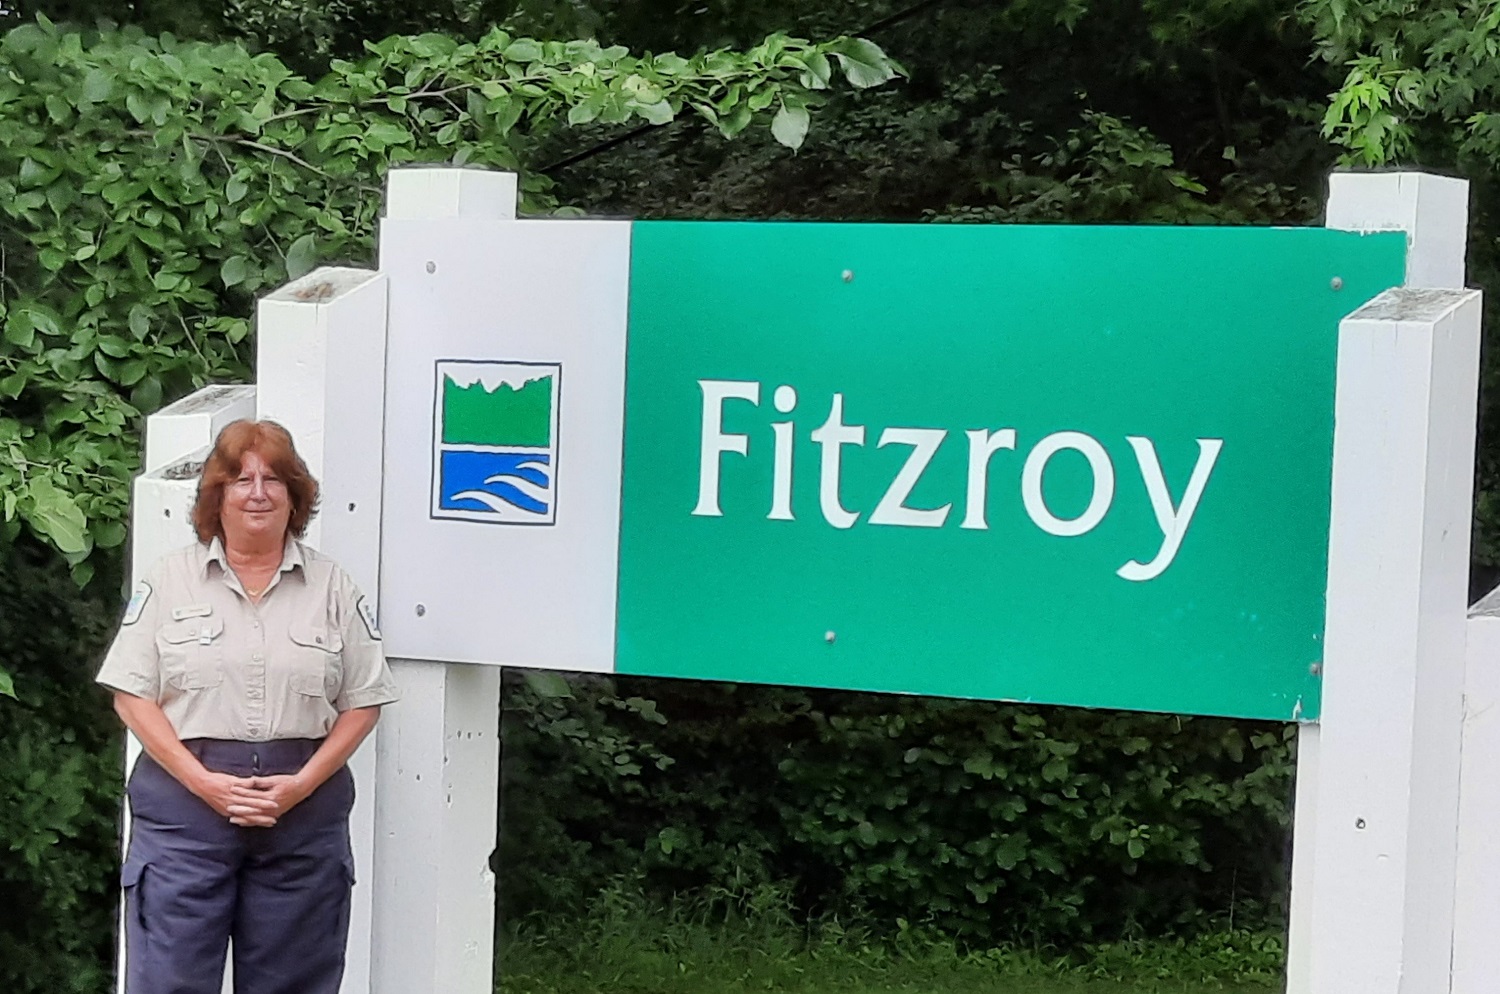 park clerk standing in front of Fitzroy entrance sign